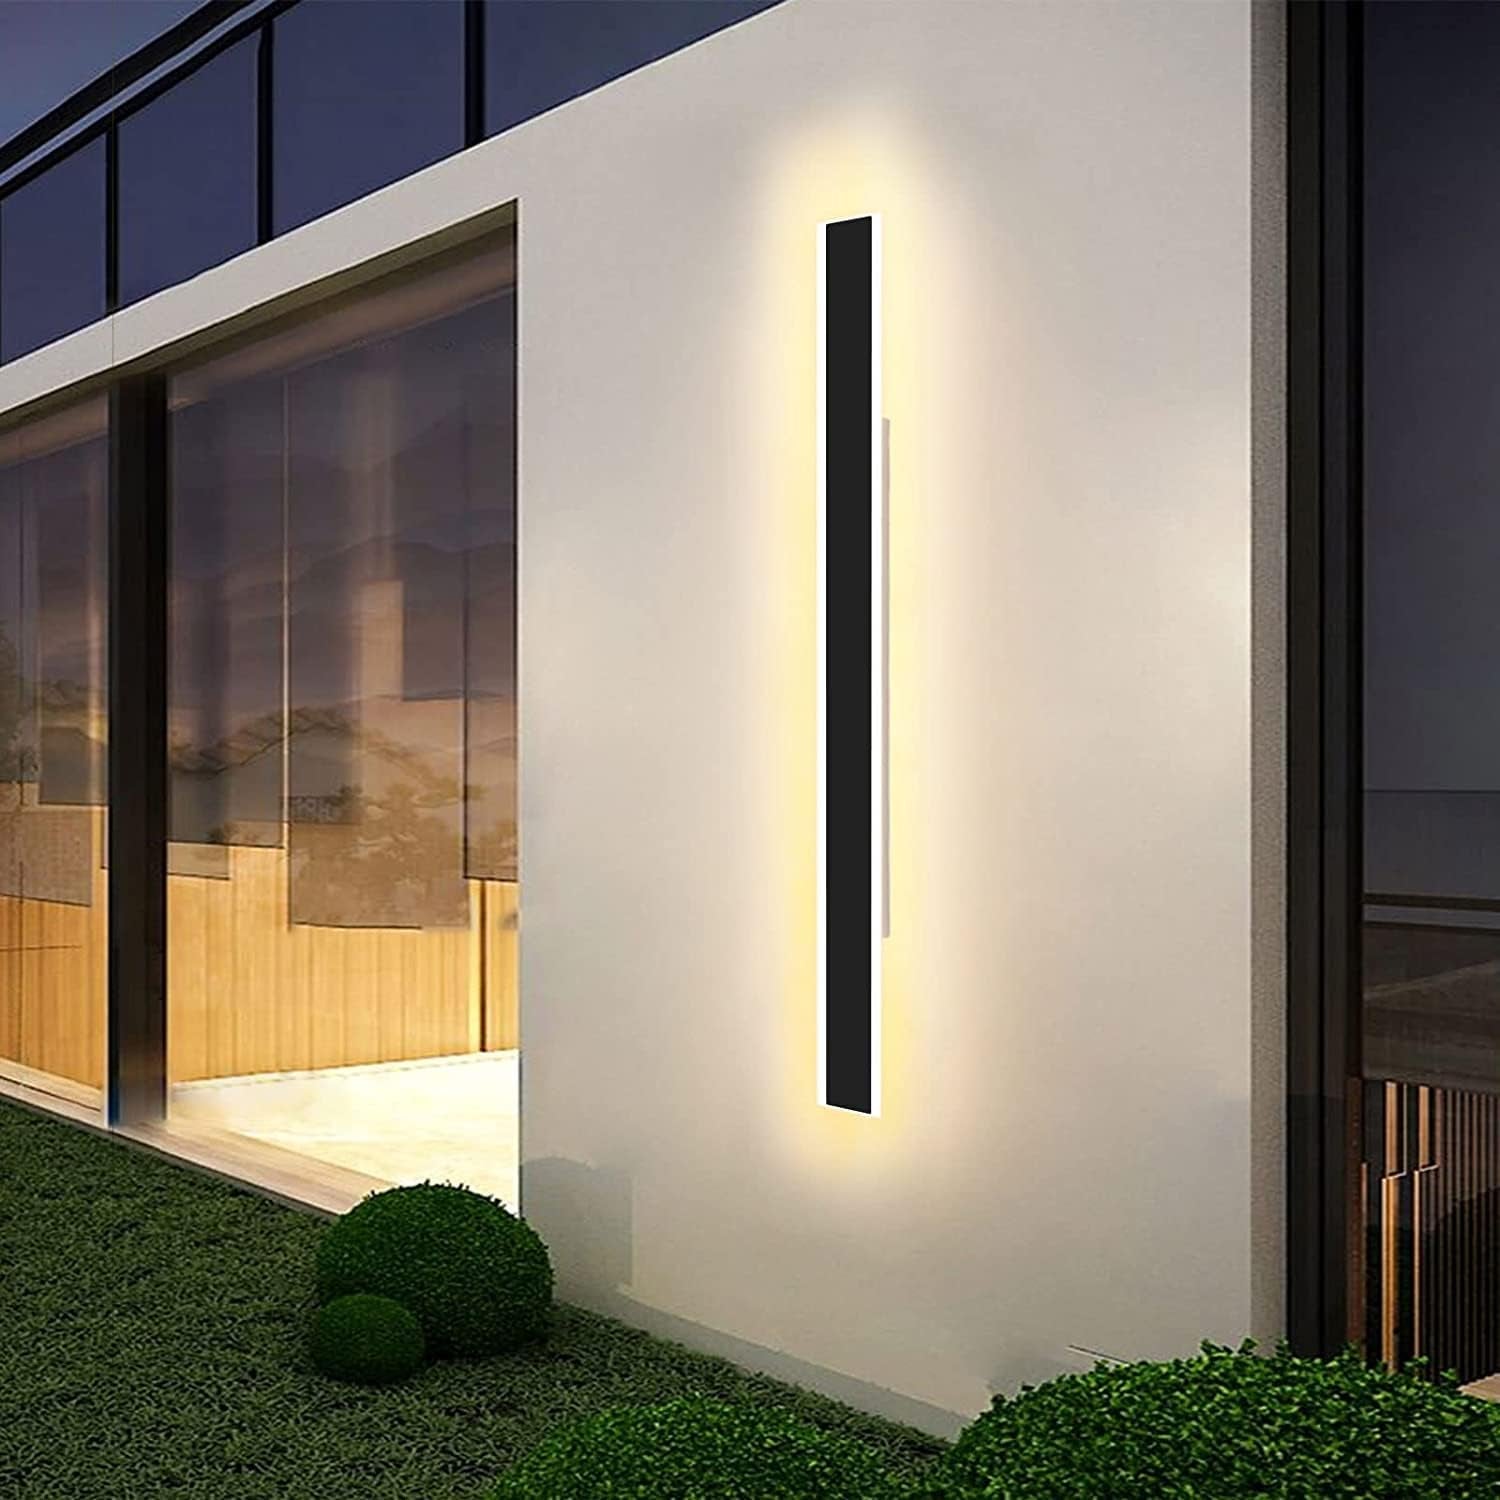 Daoseolo Outdoor Wall Sconces 47Inch, Modern Wall Lamp with Warm Lights, Frosted Acrylic Panel with Light Transmittance Greater Than 95%, IP65 Waterproof Minimalist Porch Wall Fixture for Garage - Selzalot